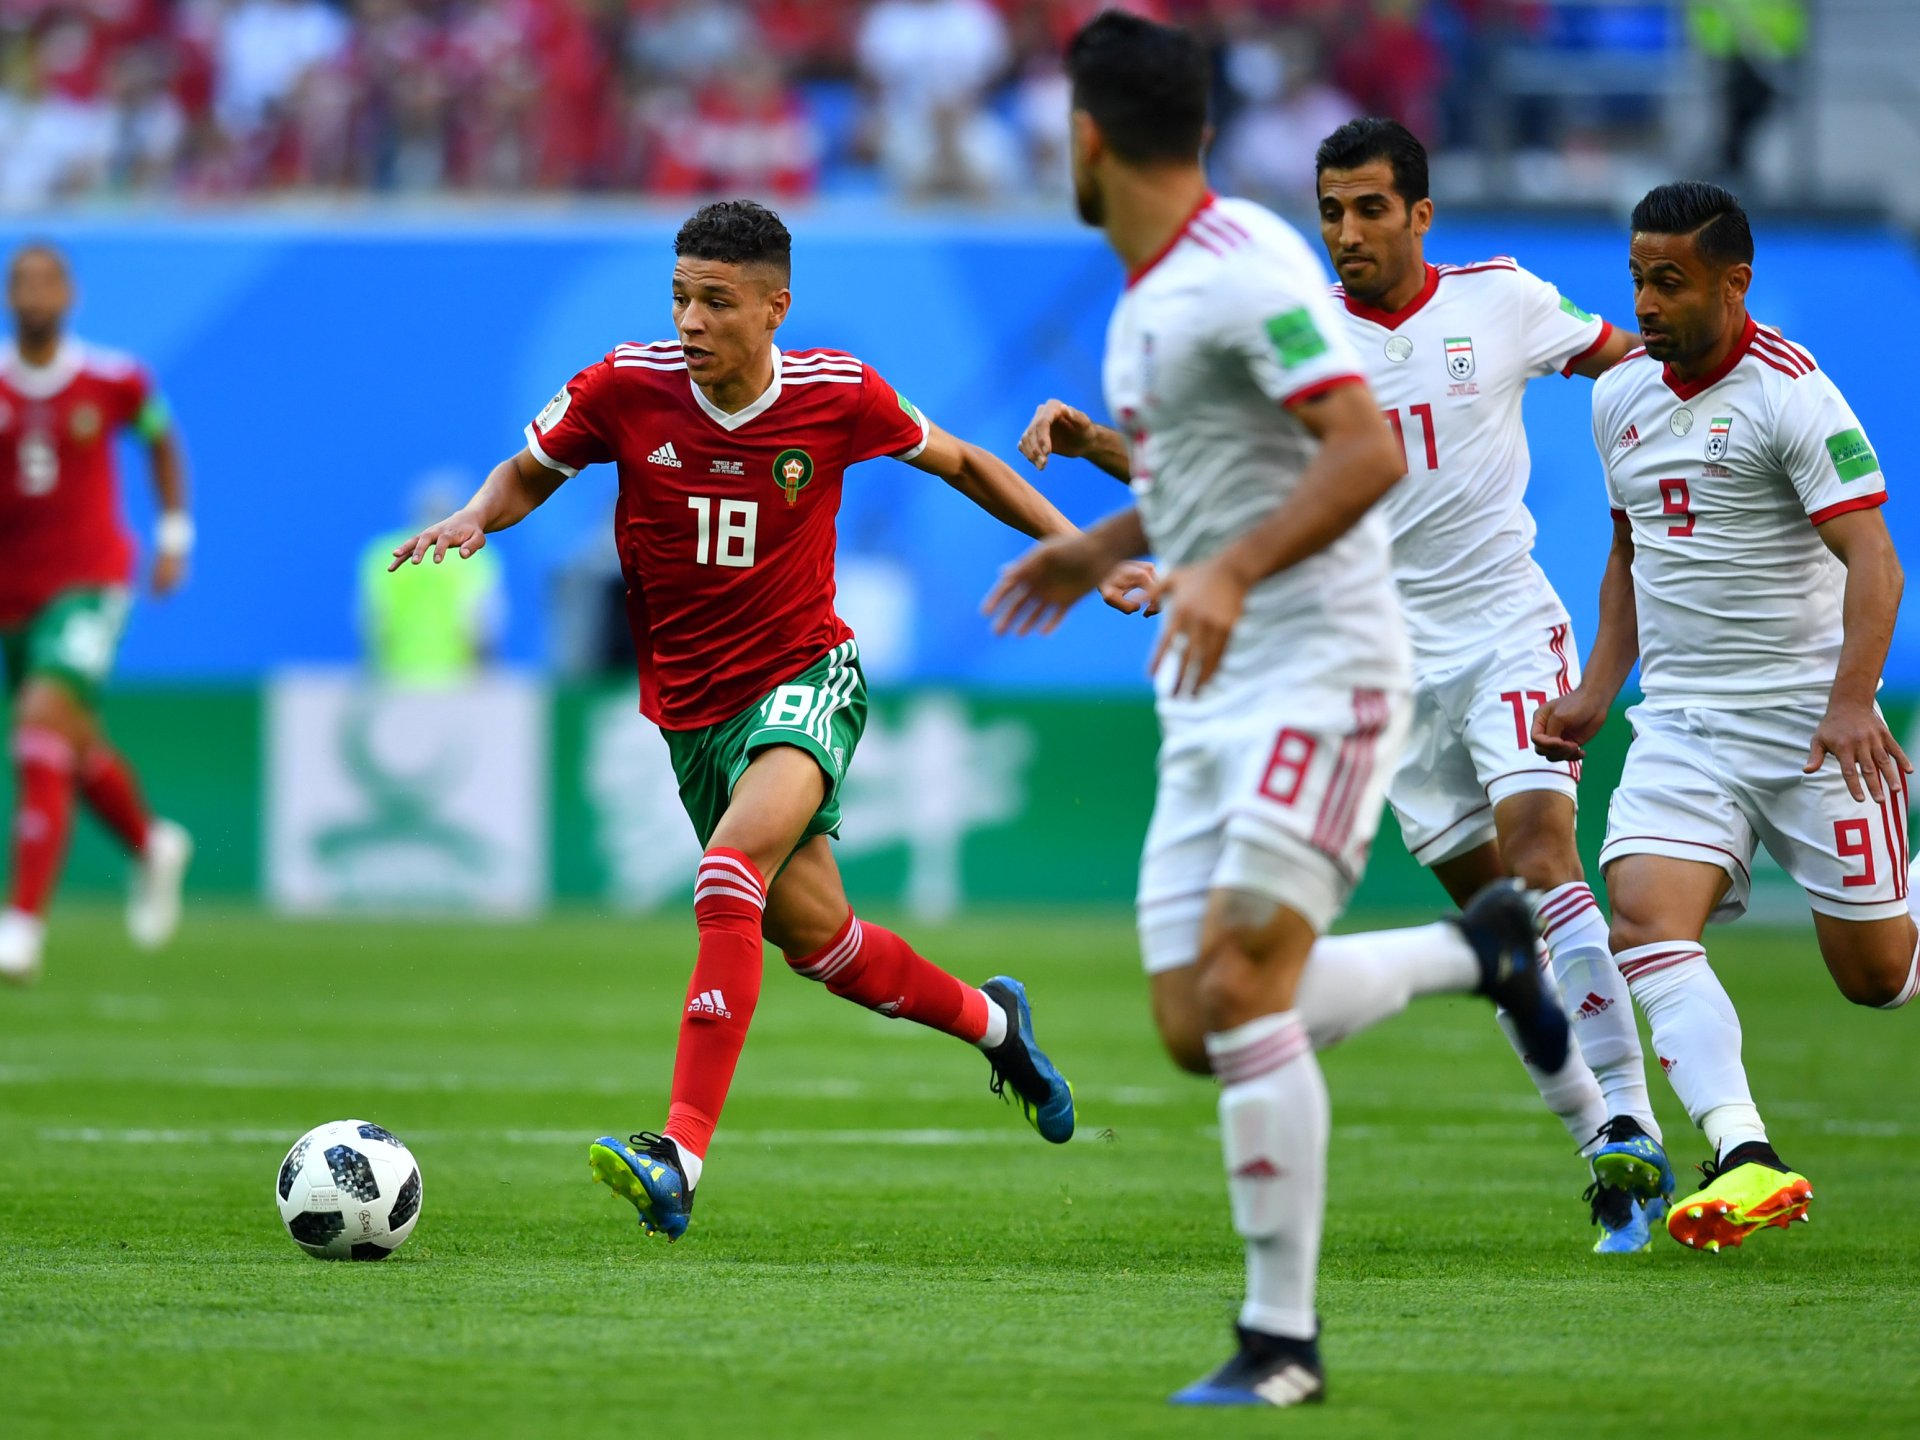 Morocco’s injured midfielder Harit joins teammates at World Cup